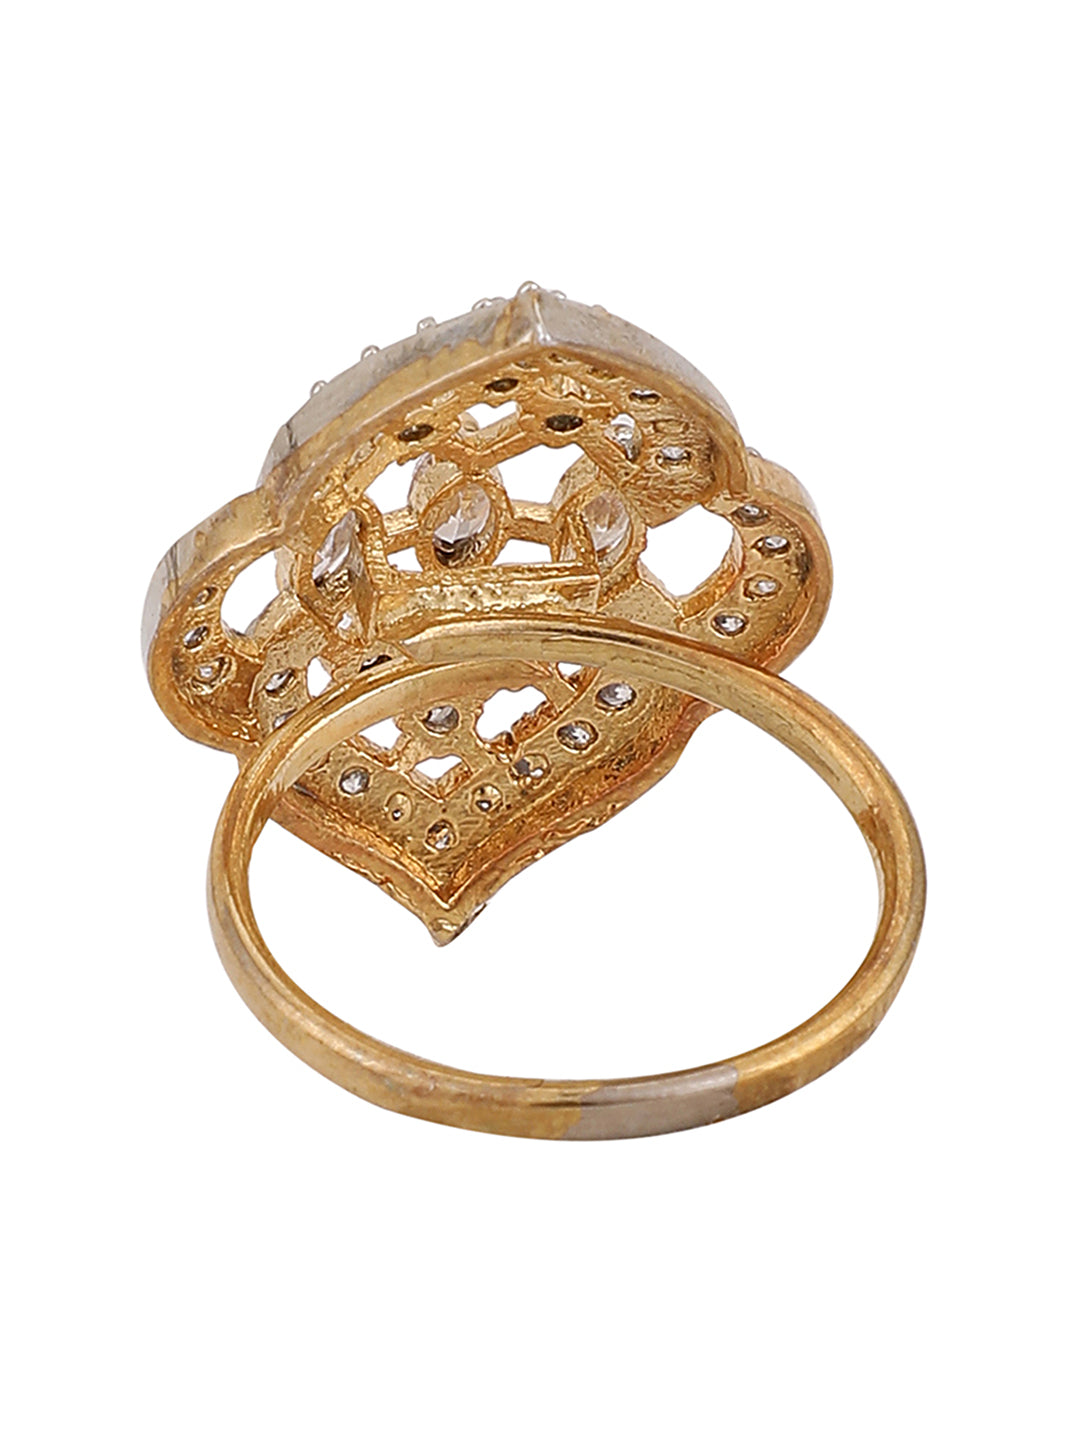 Women's American Diamond Gold Plated Stone Studded Adjustable Cocktail Ring - Anikas Creation